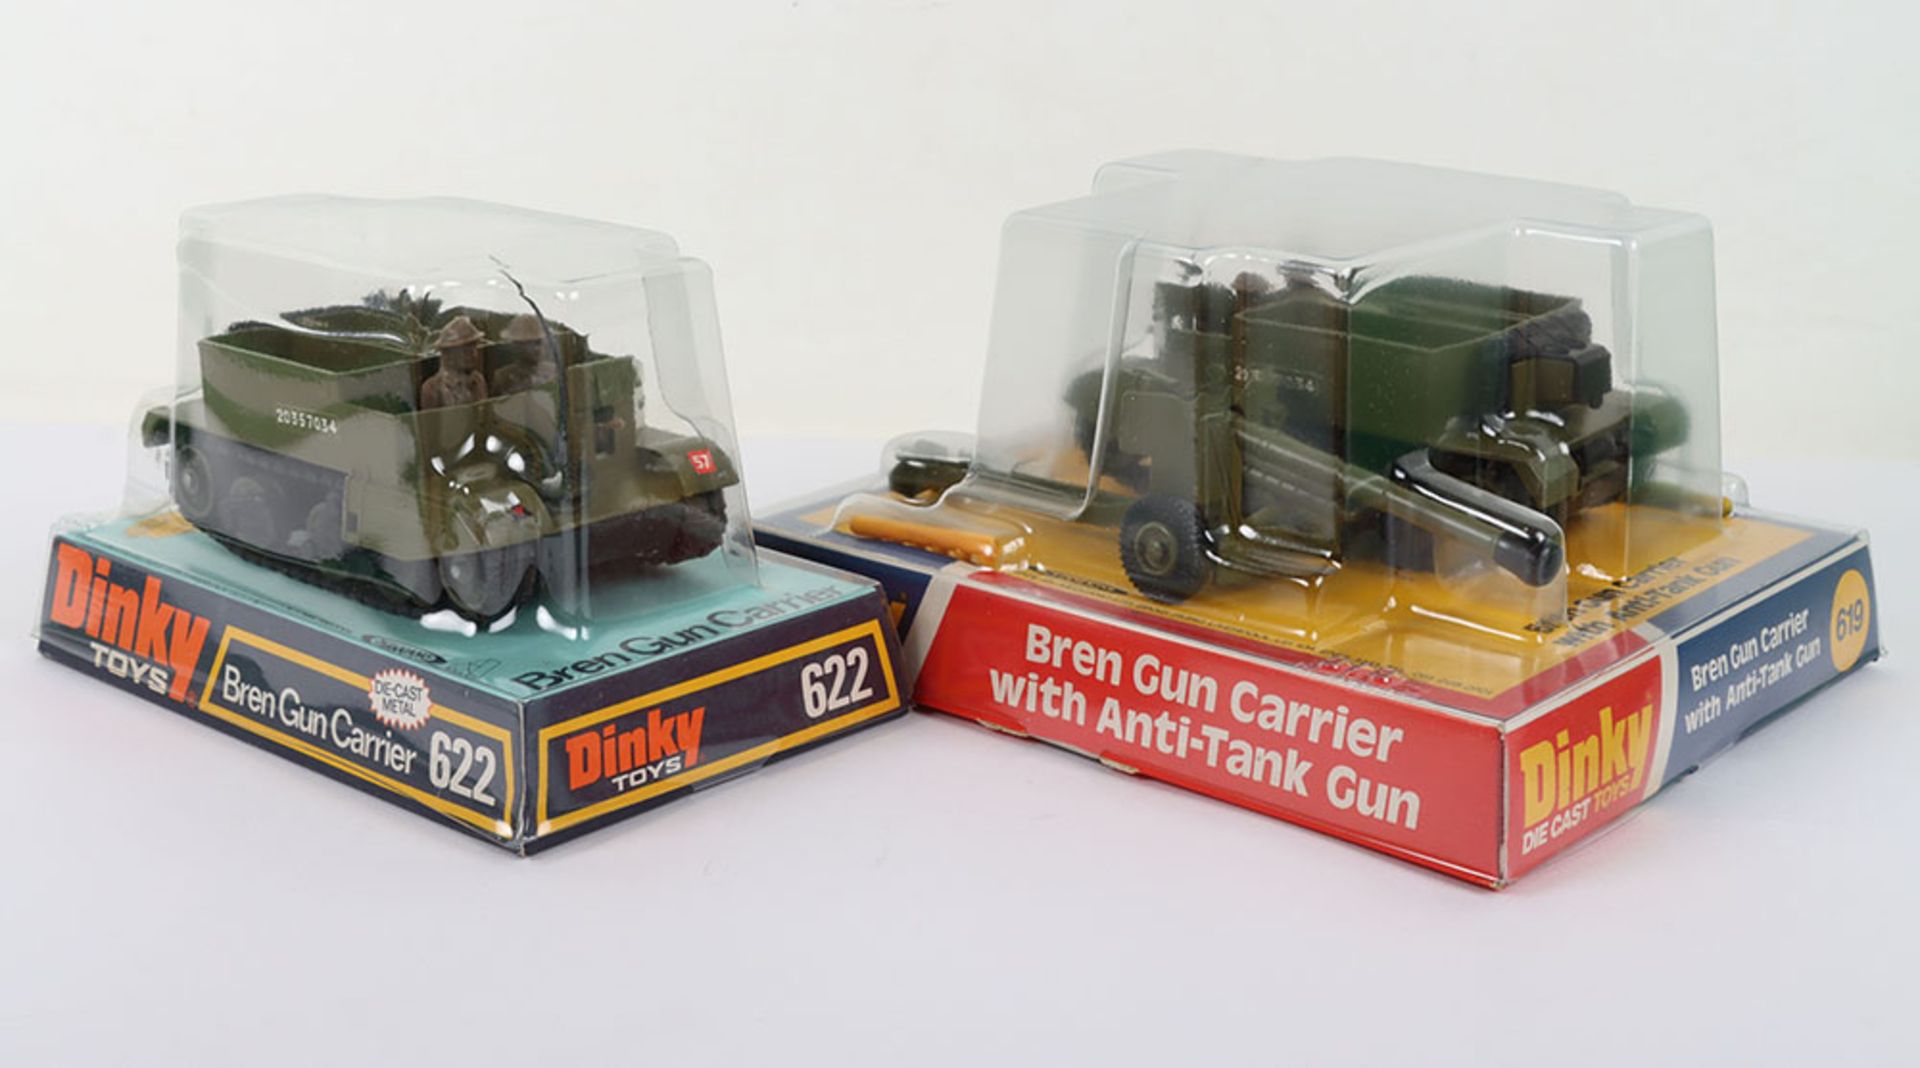 Two Dinky Toys Military Bren Gun Carriers